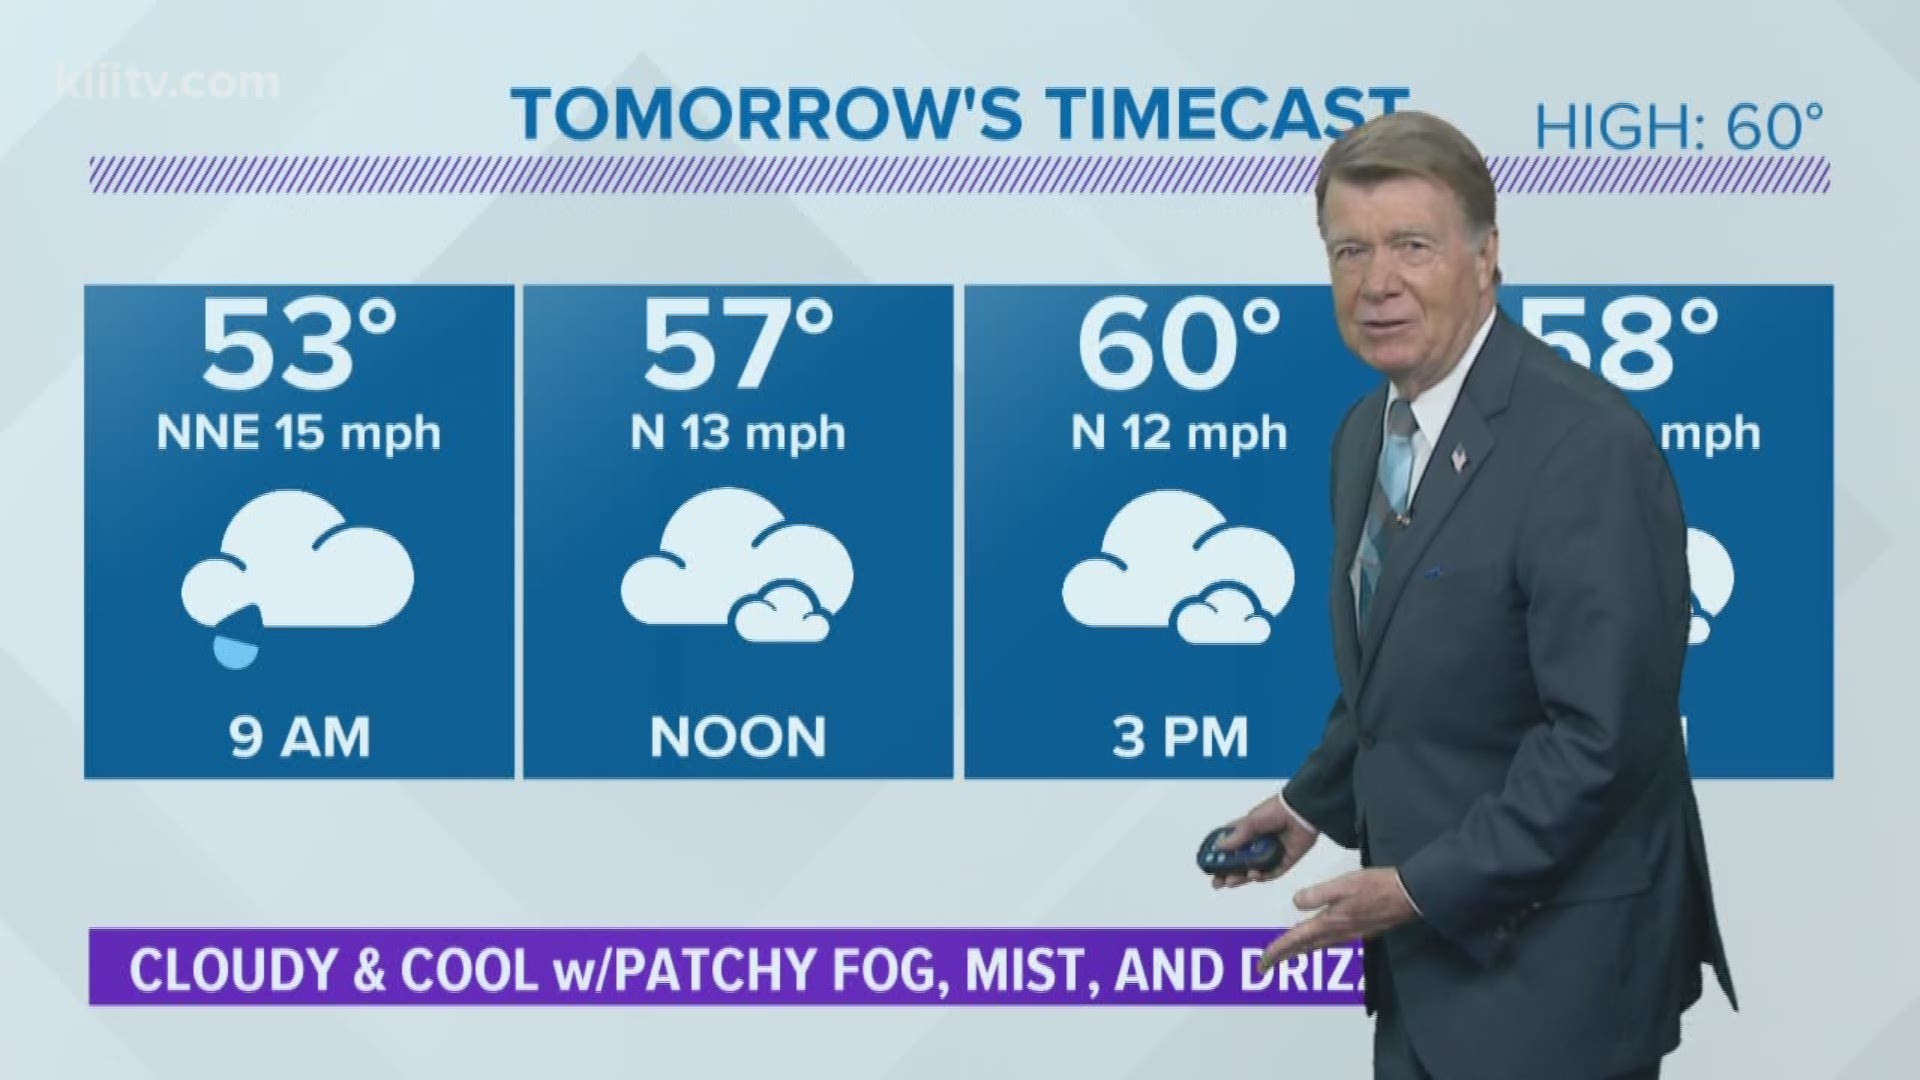 Cloudy and cool with patchy fog, mist, drizzle, light rain